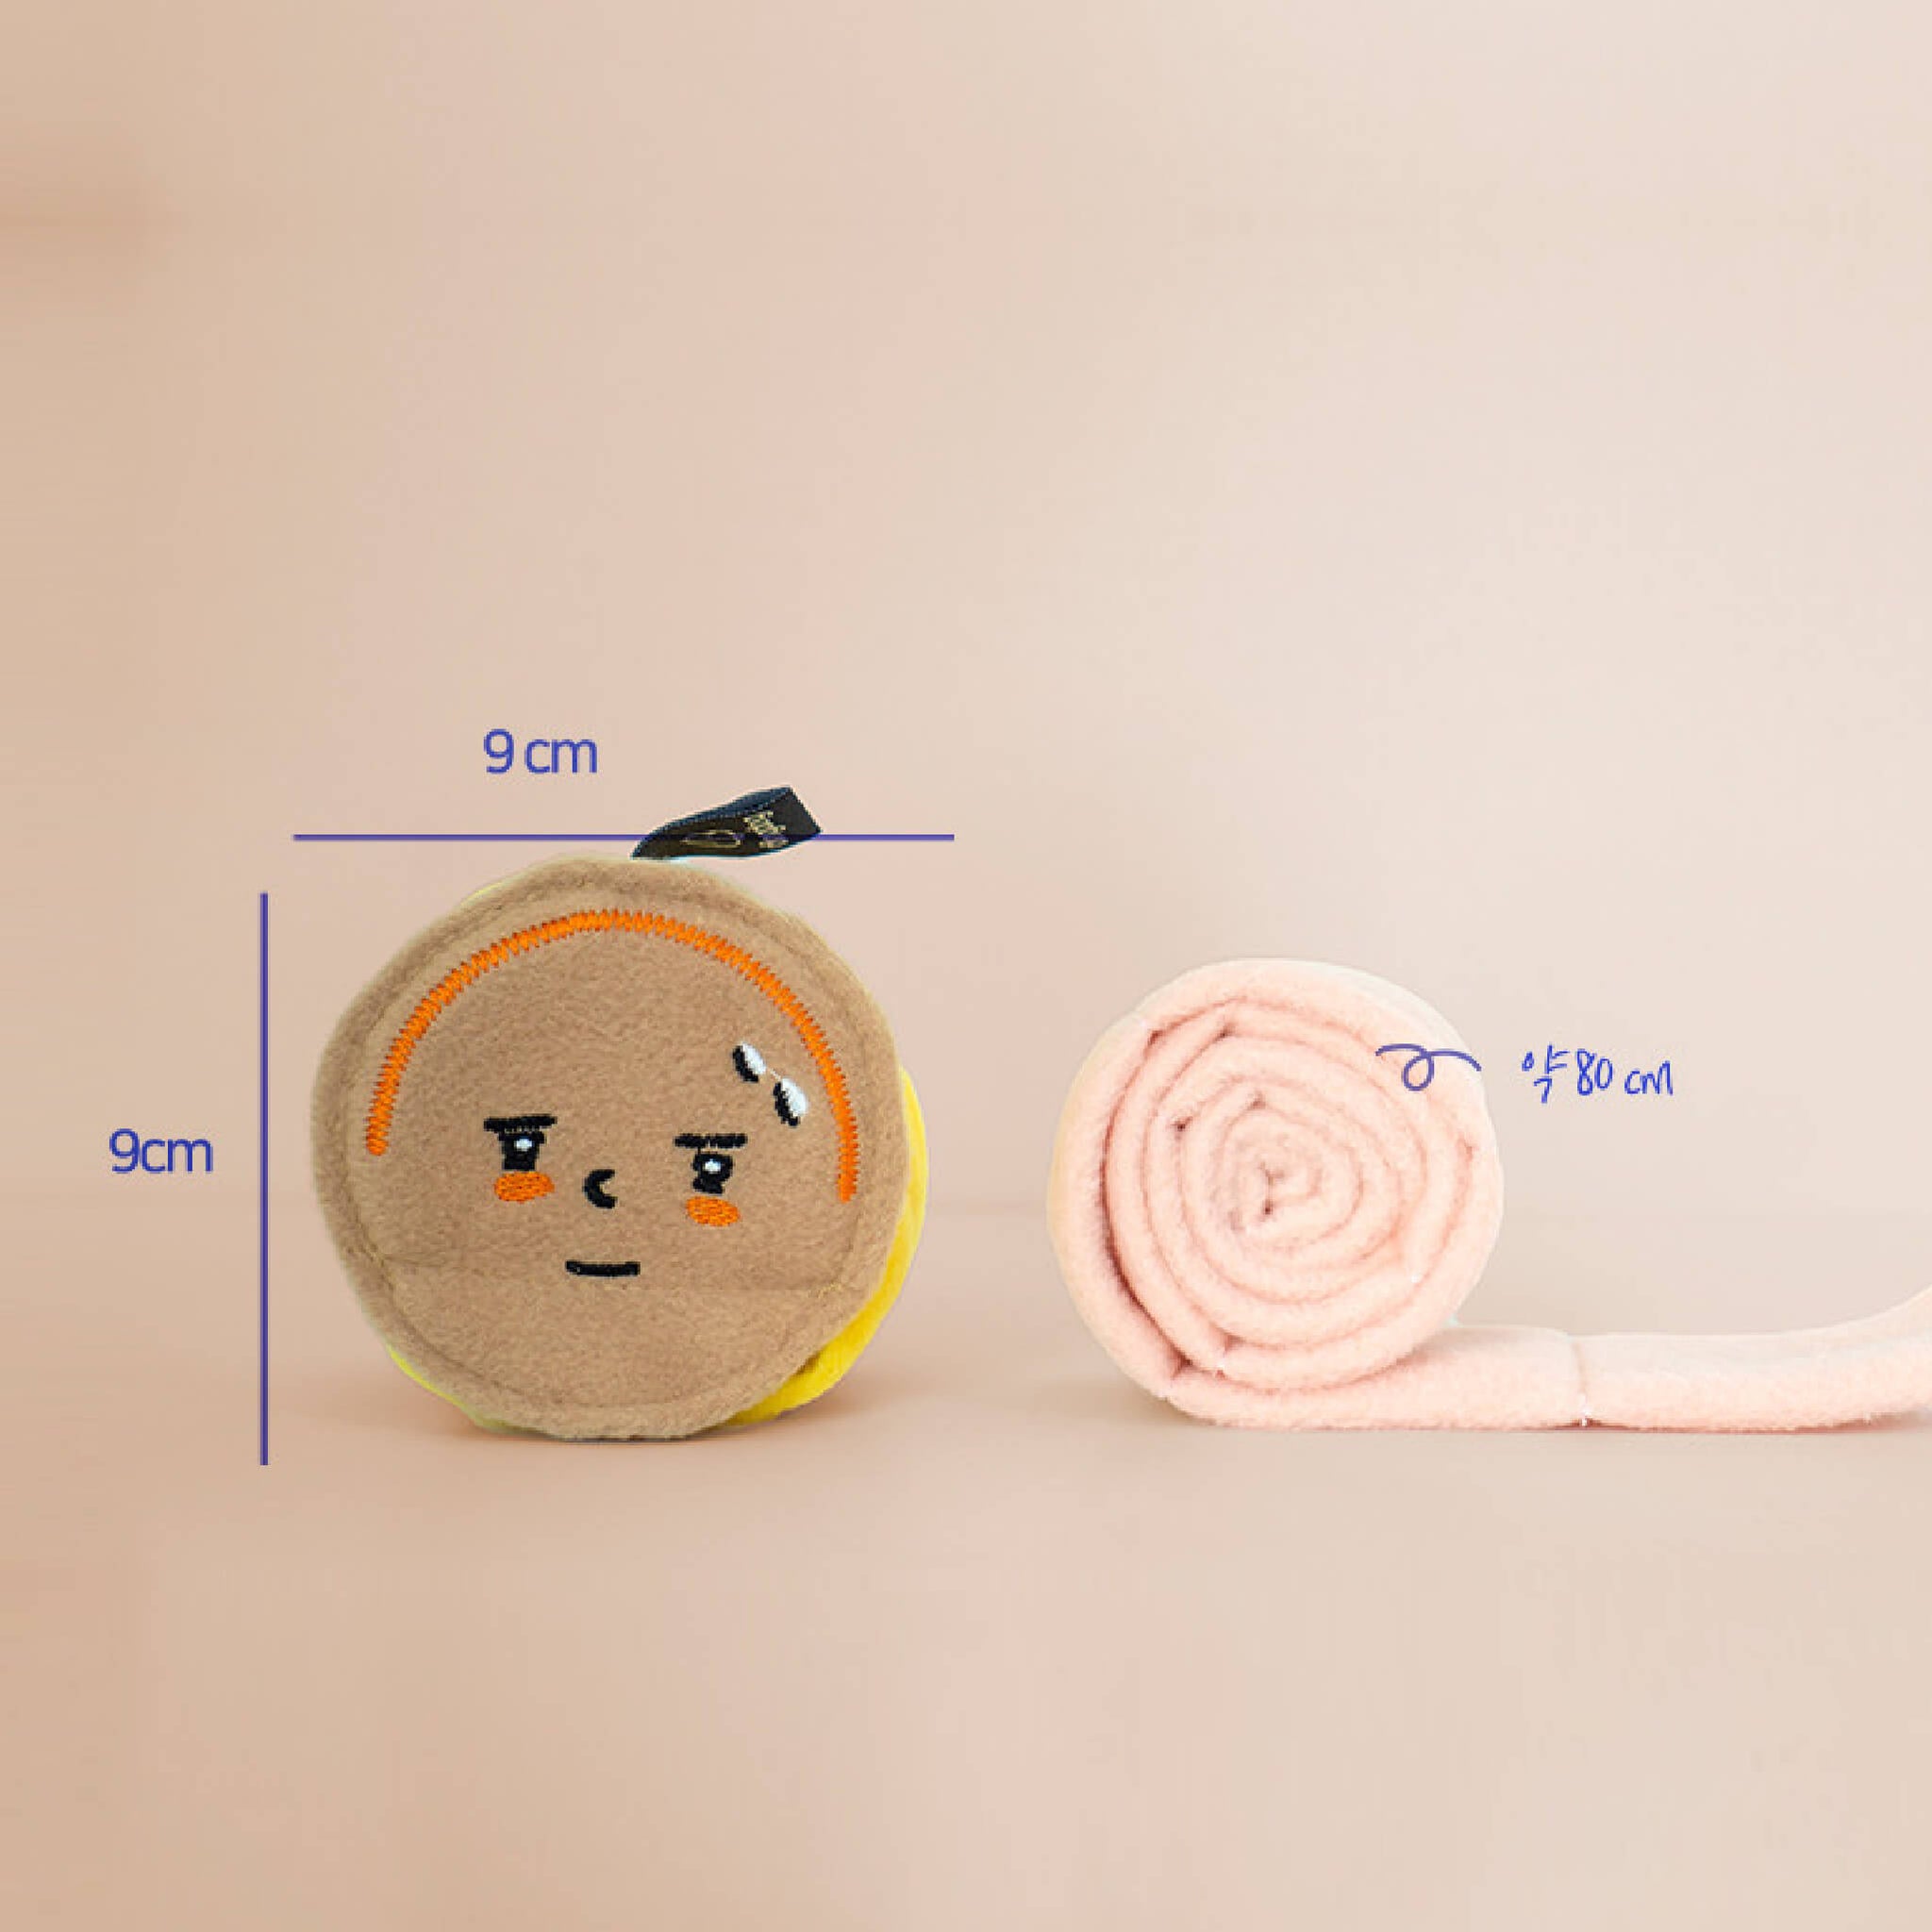 Dimensions for tuna nosework toy.